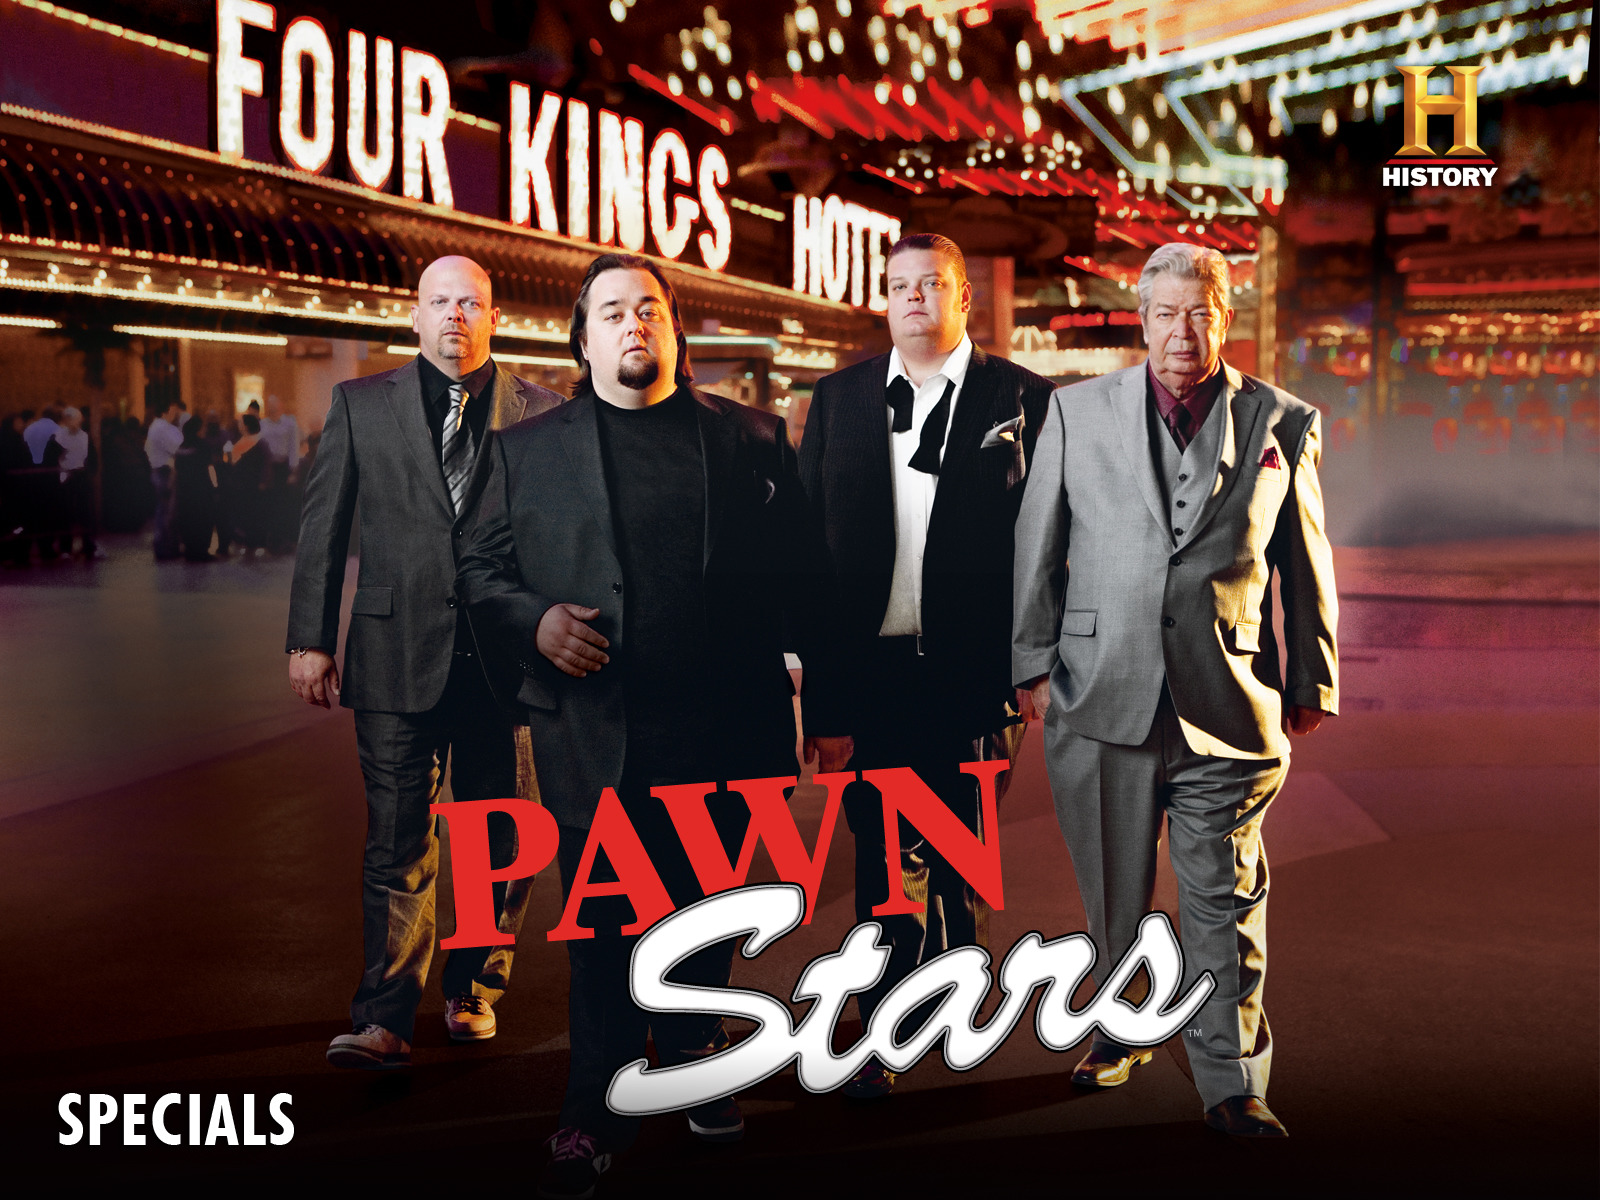 pawn star poster